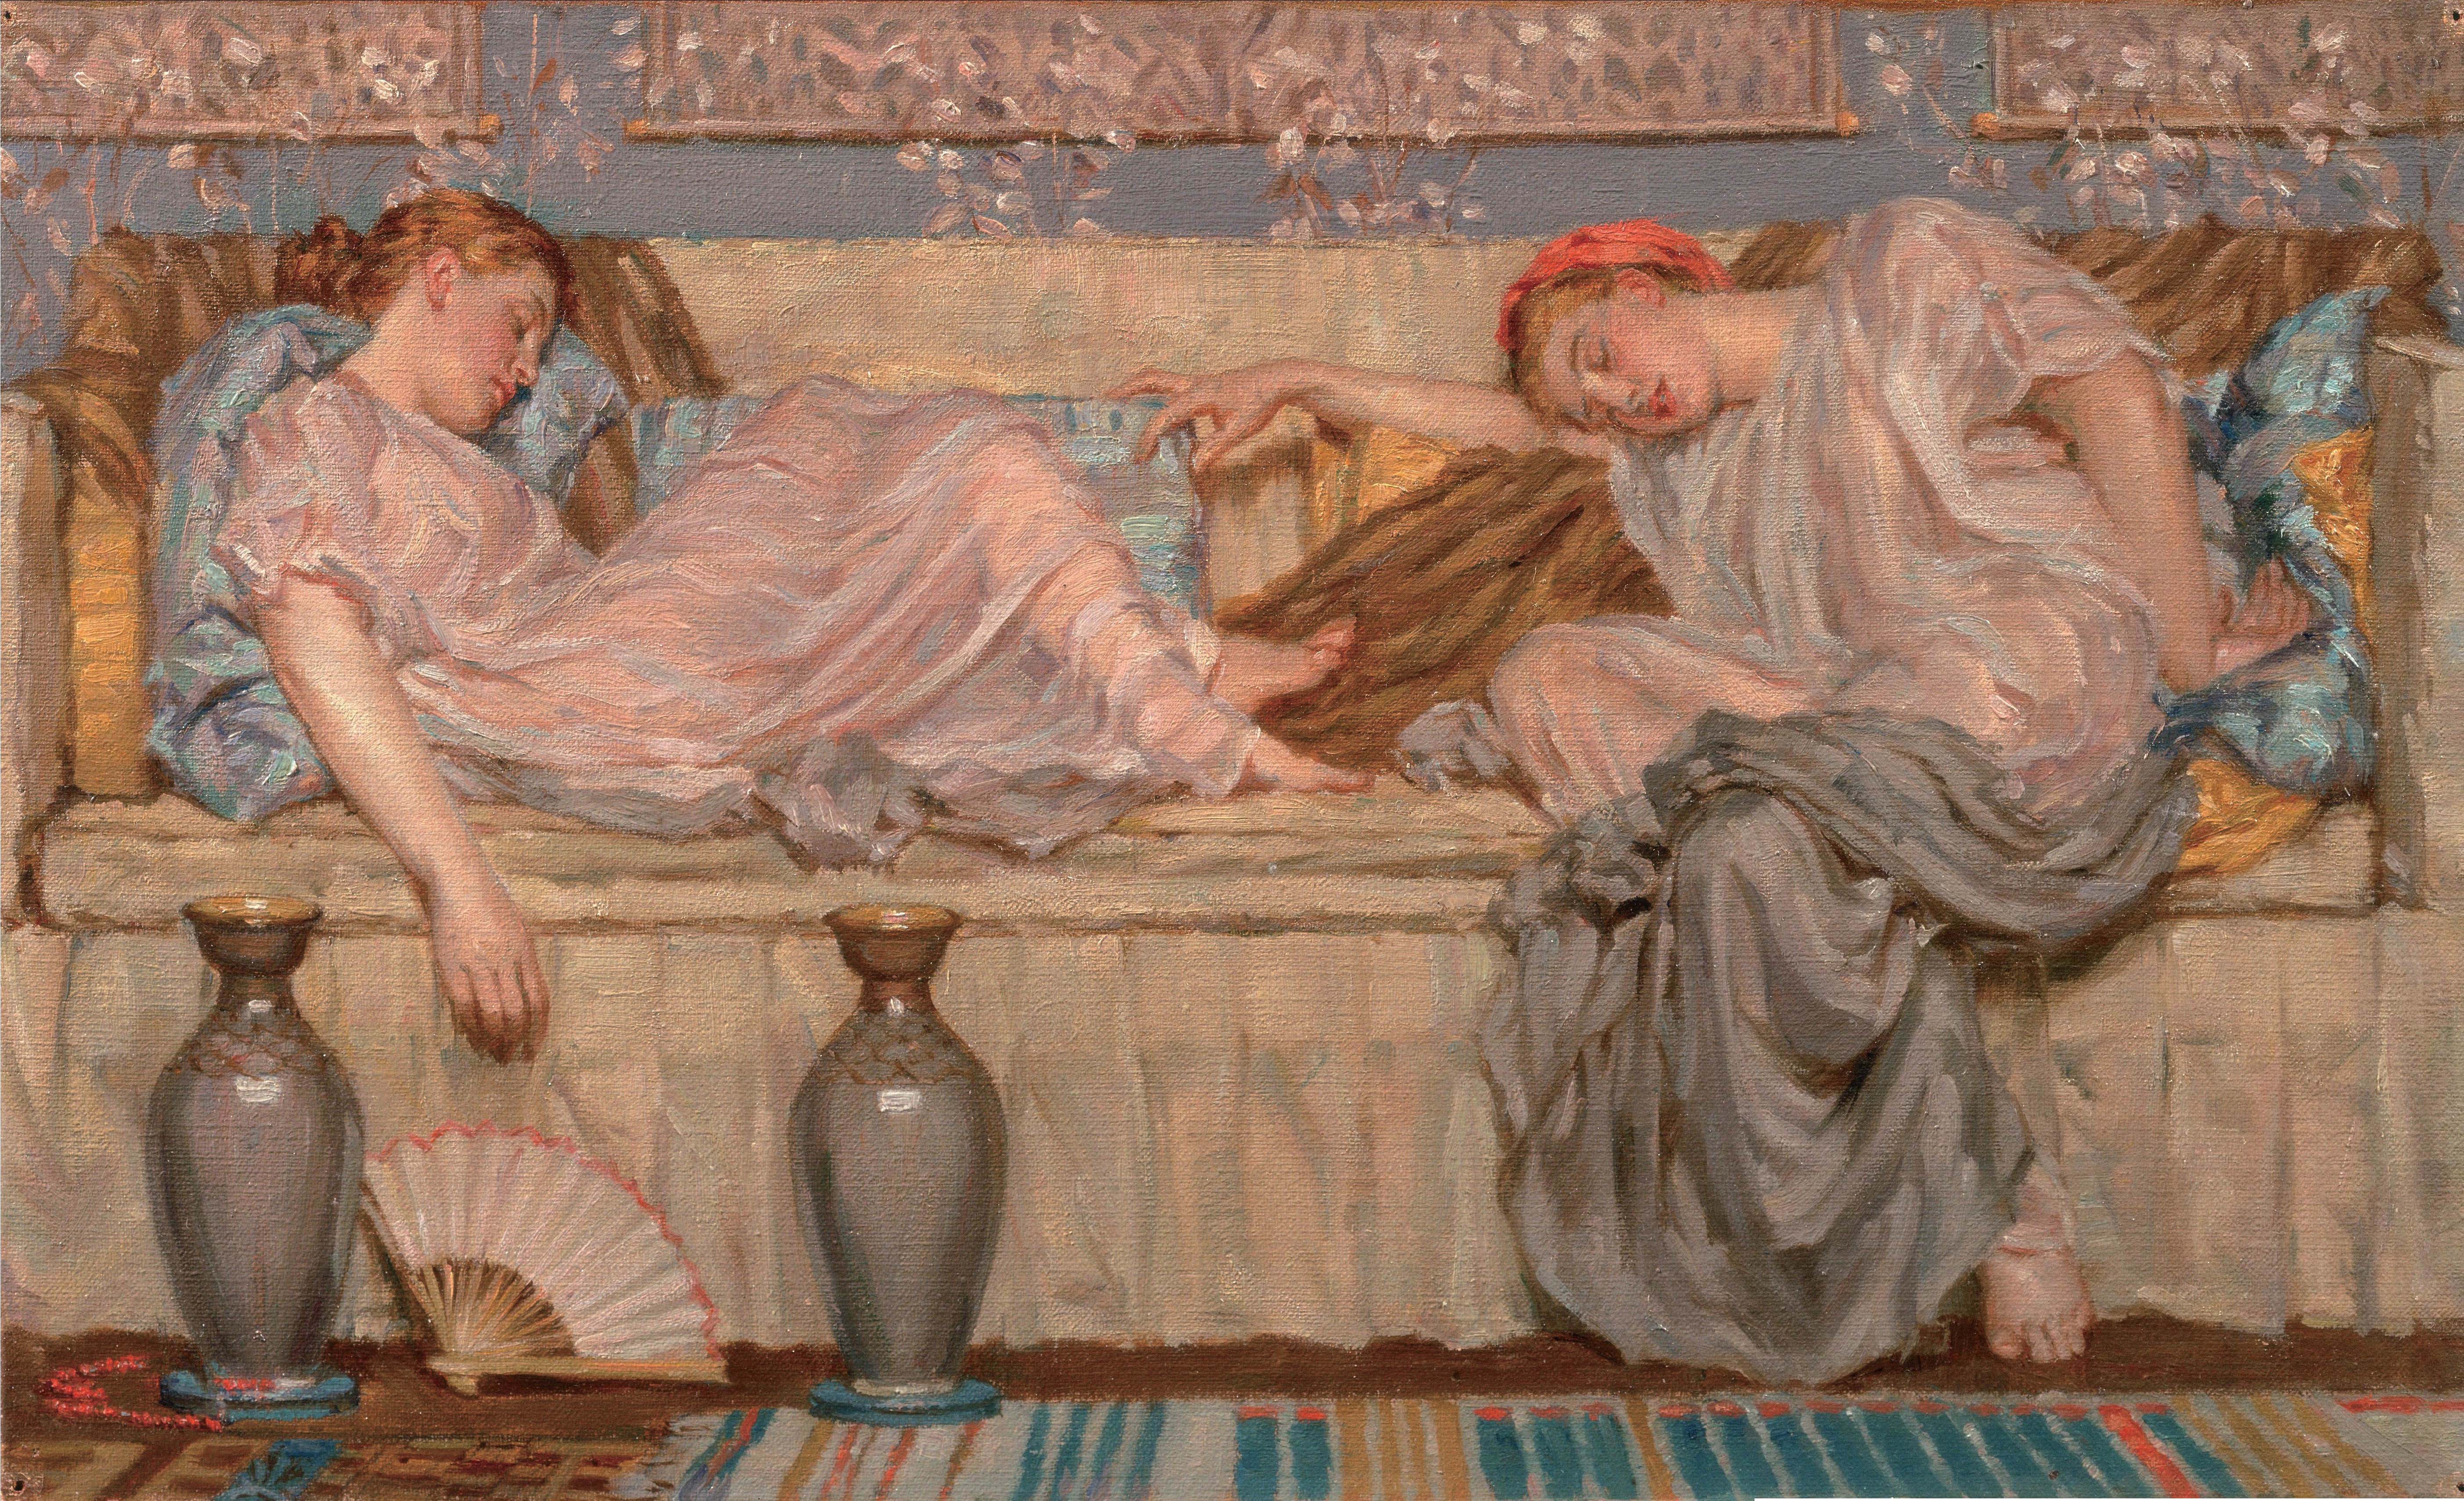 General 5612x3419 Oil on canvas oil painting Albert Joseph Moore women sleeping couch closed eyes artwork classic art vases fans